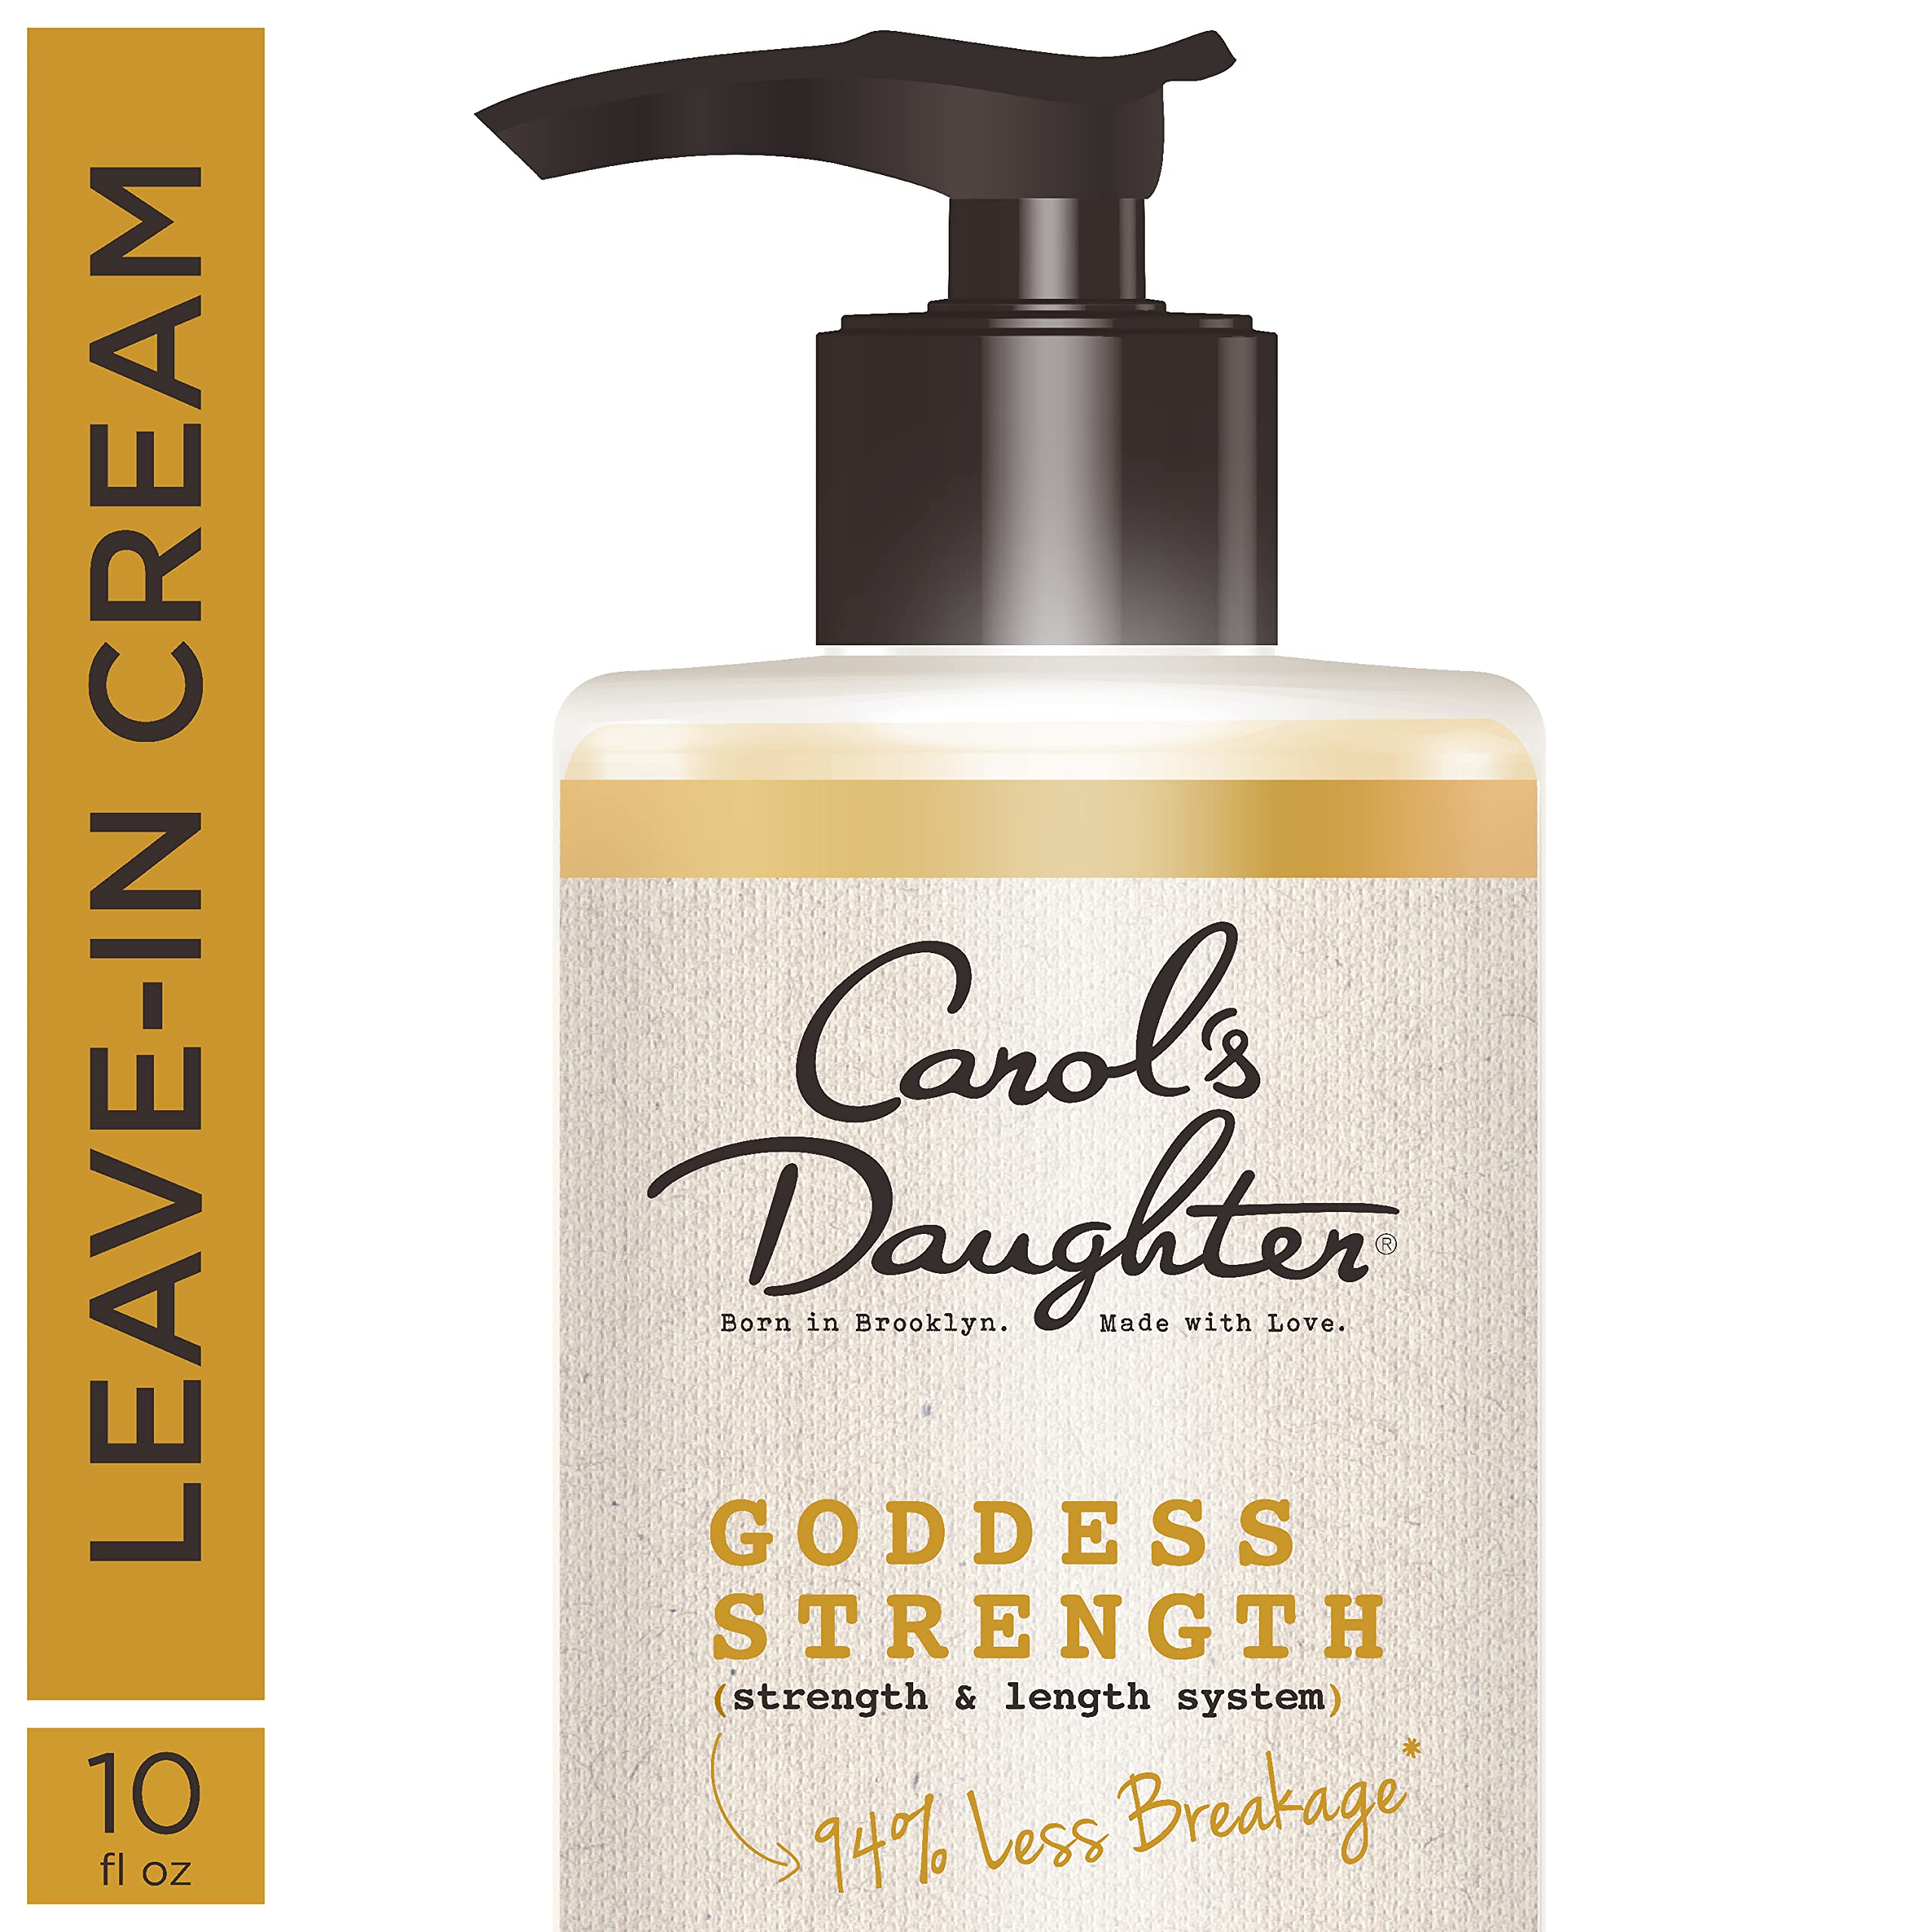 Carol's Daughter Goddess Strength Leave In Conditioner Cream for Curly Hair – with Castor Oil, 10 fl oz